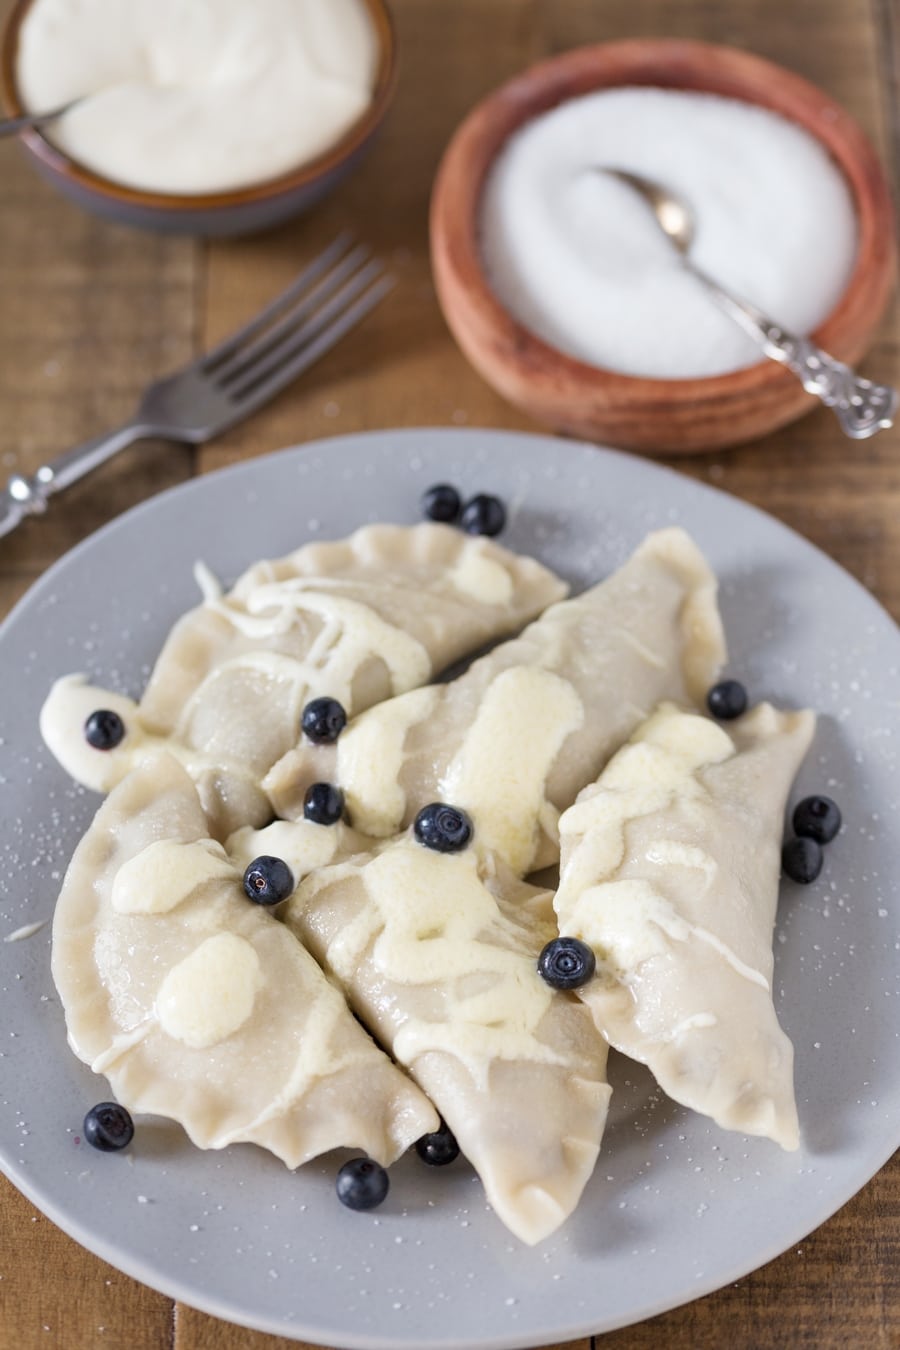 Cooked blueberry pierogi served with sour cream.